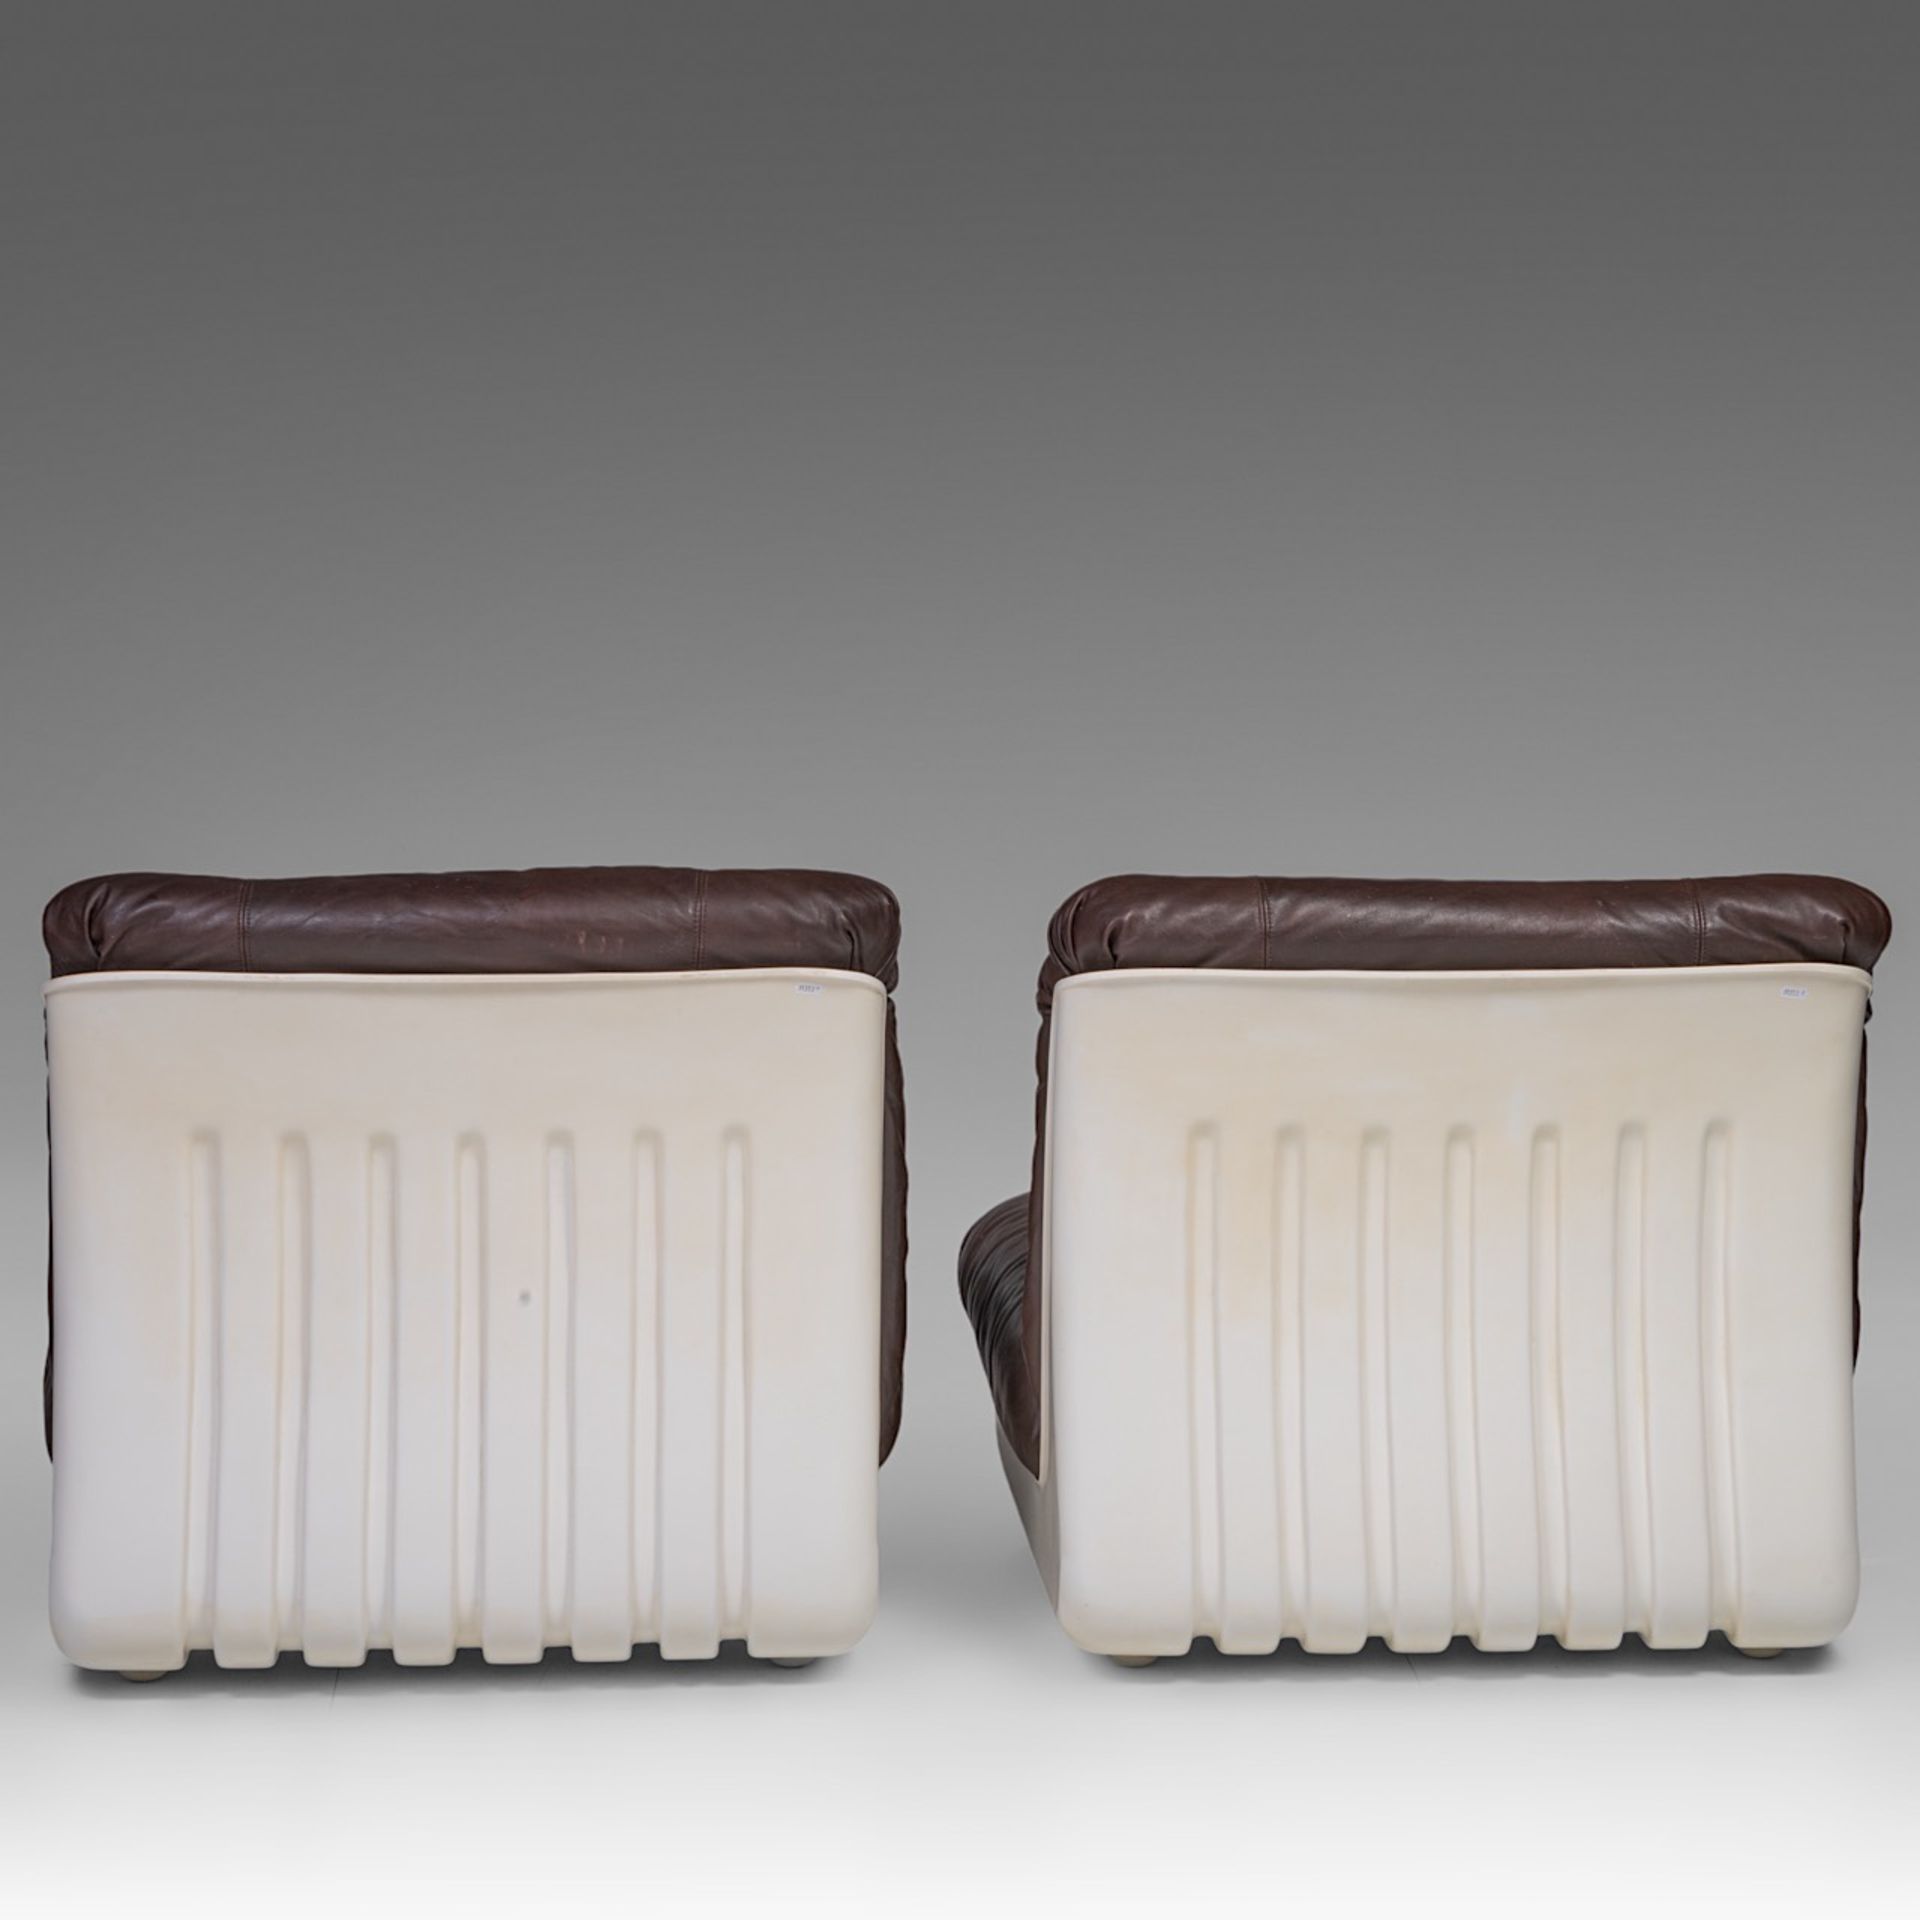 A vintage pair of loacoda chairs by Waldmann, Golz en Schmidt, made by Durlet, Belgium 1972, H 73 - - Image 7 of 12